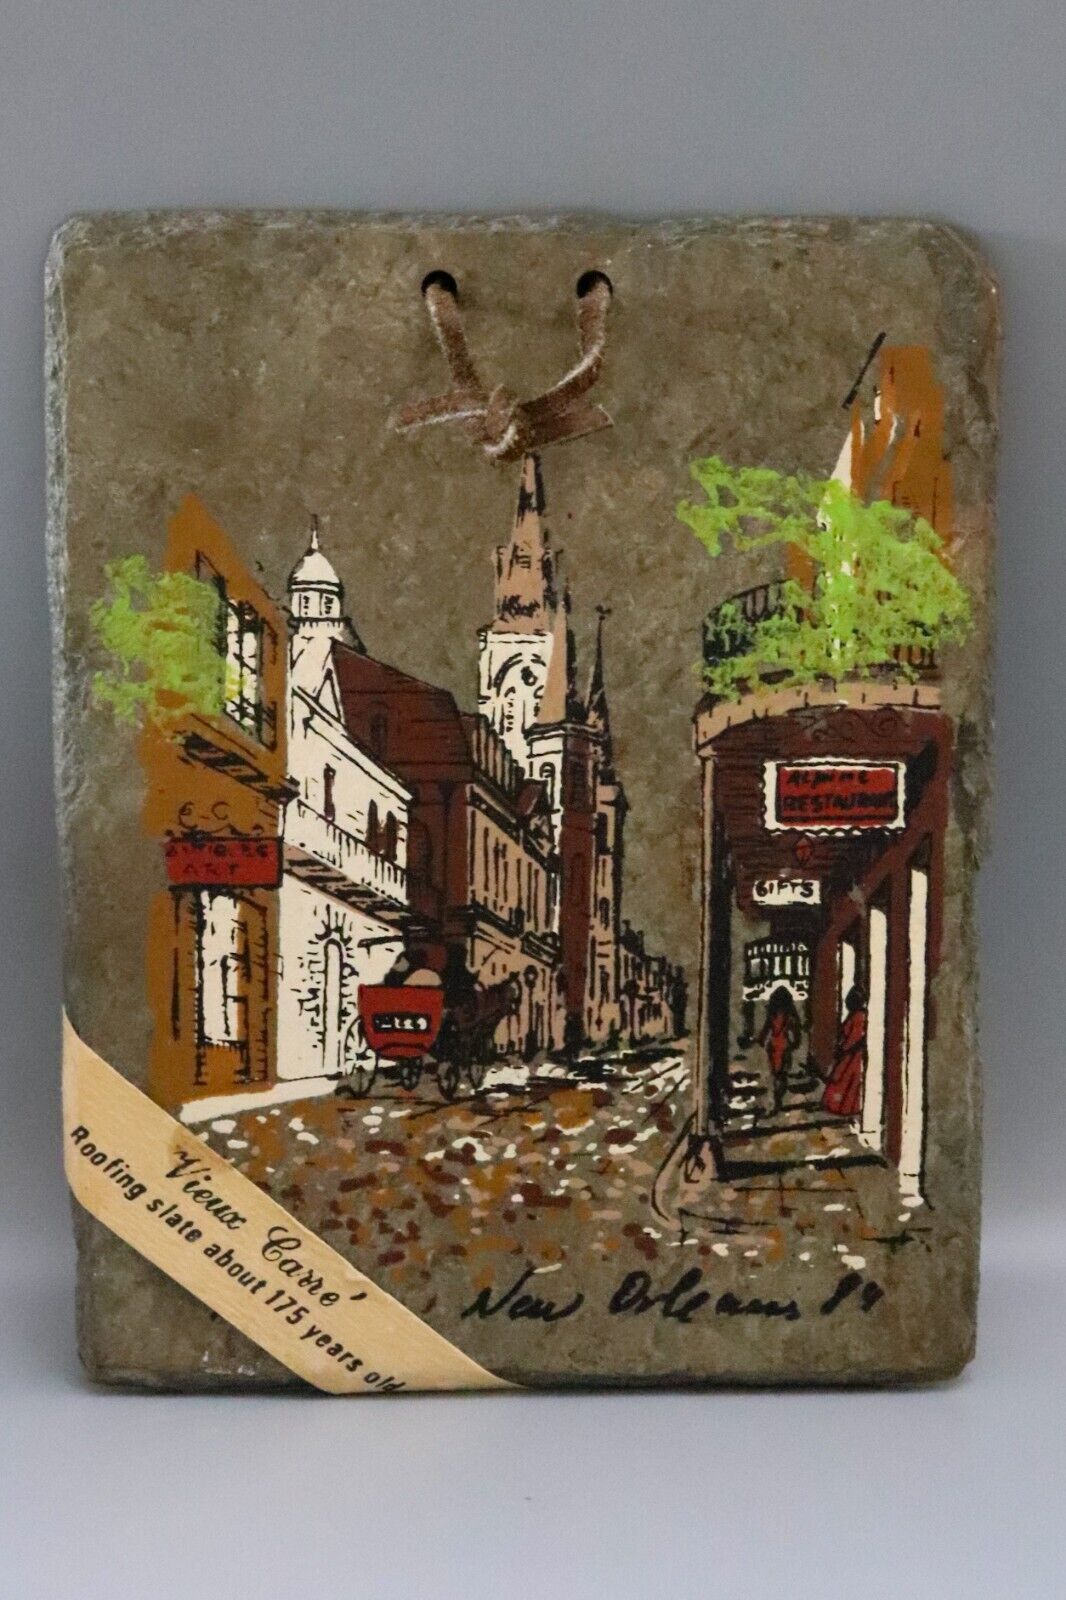 Vieux Carre' Old Square New Orleans Roofing Slate Tile 175 Year Old Tile 